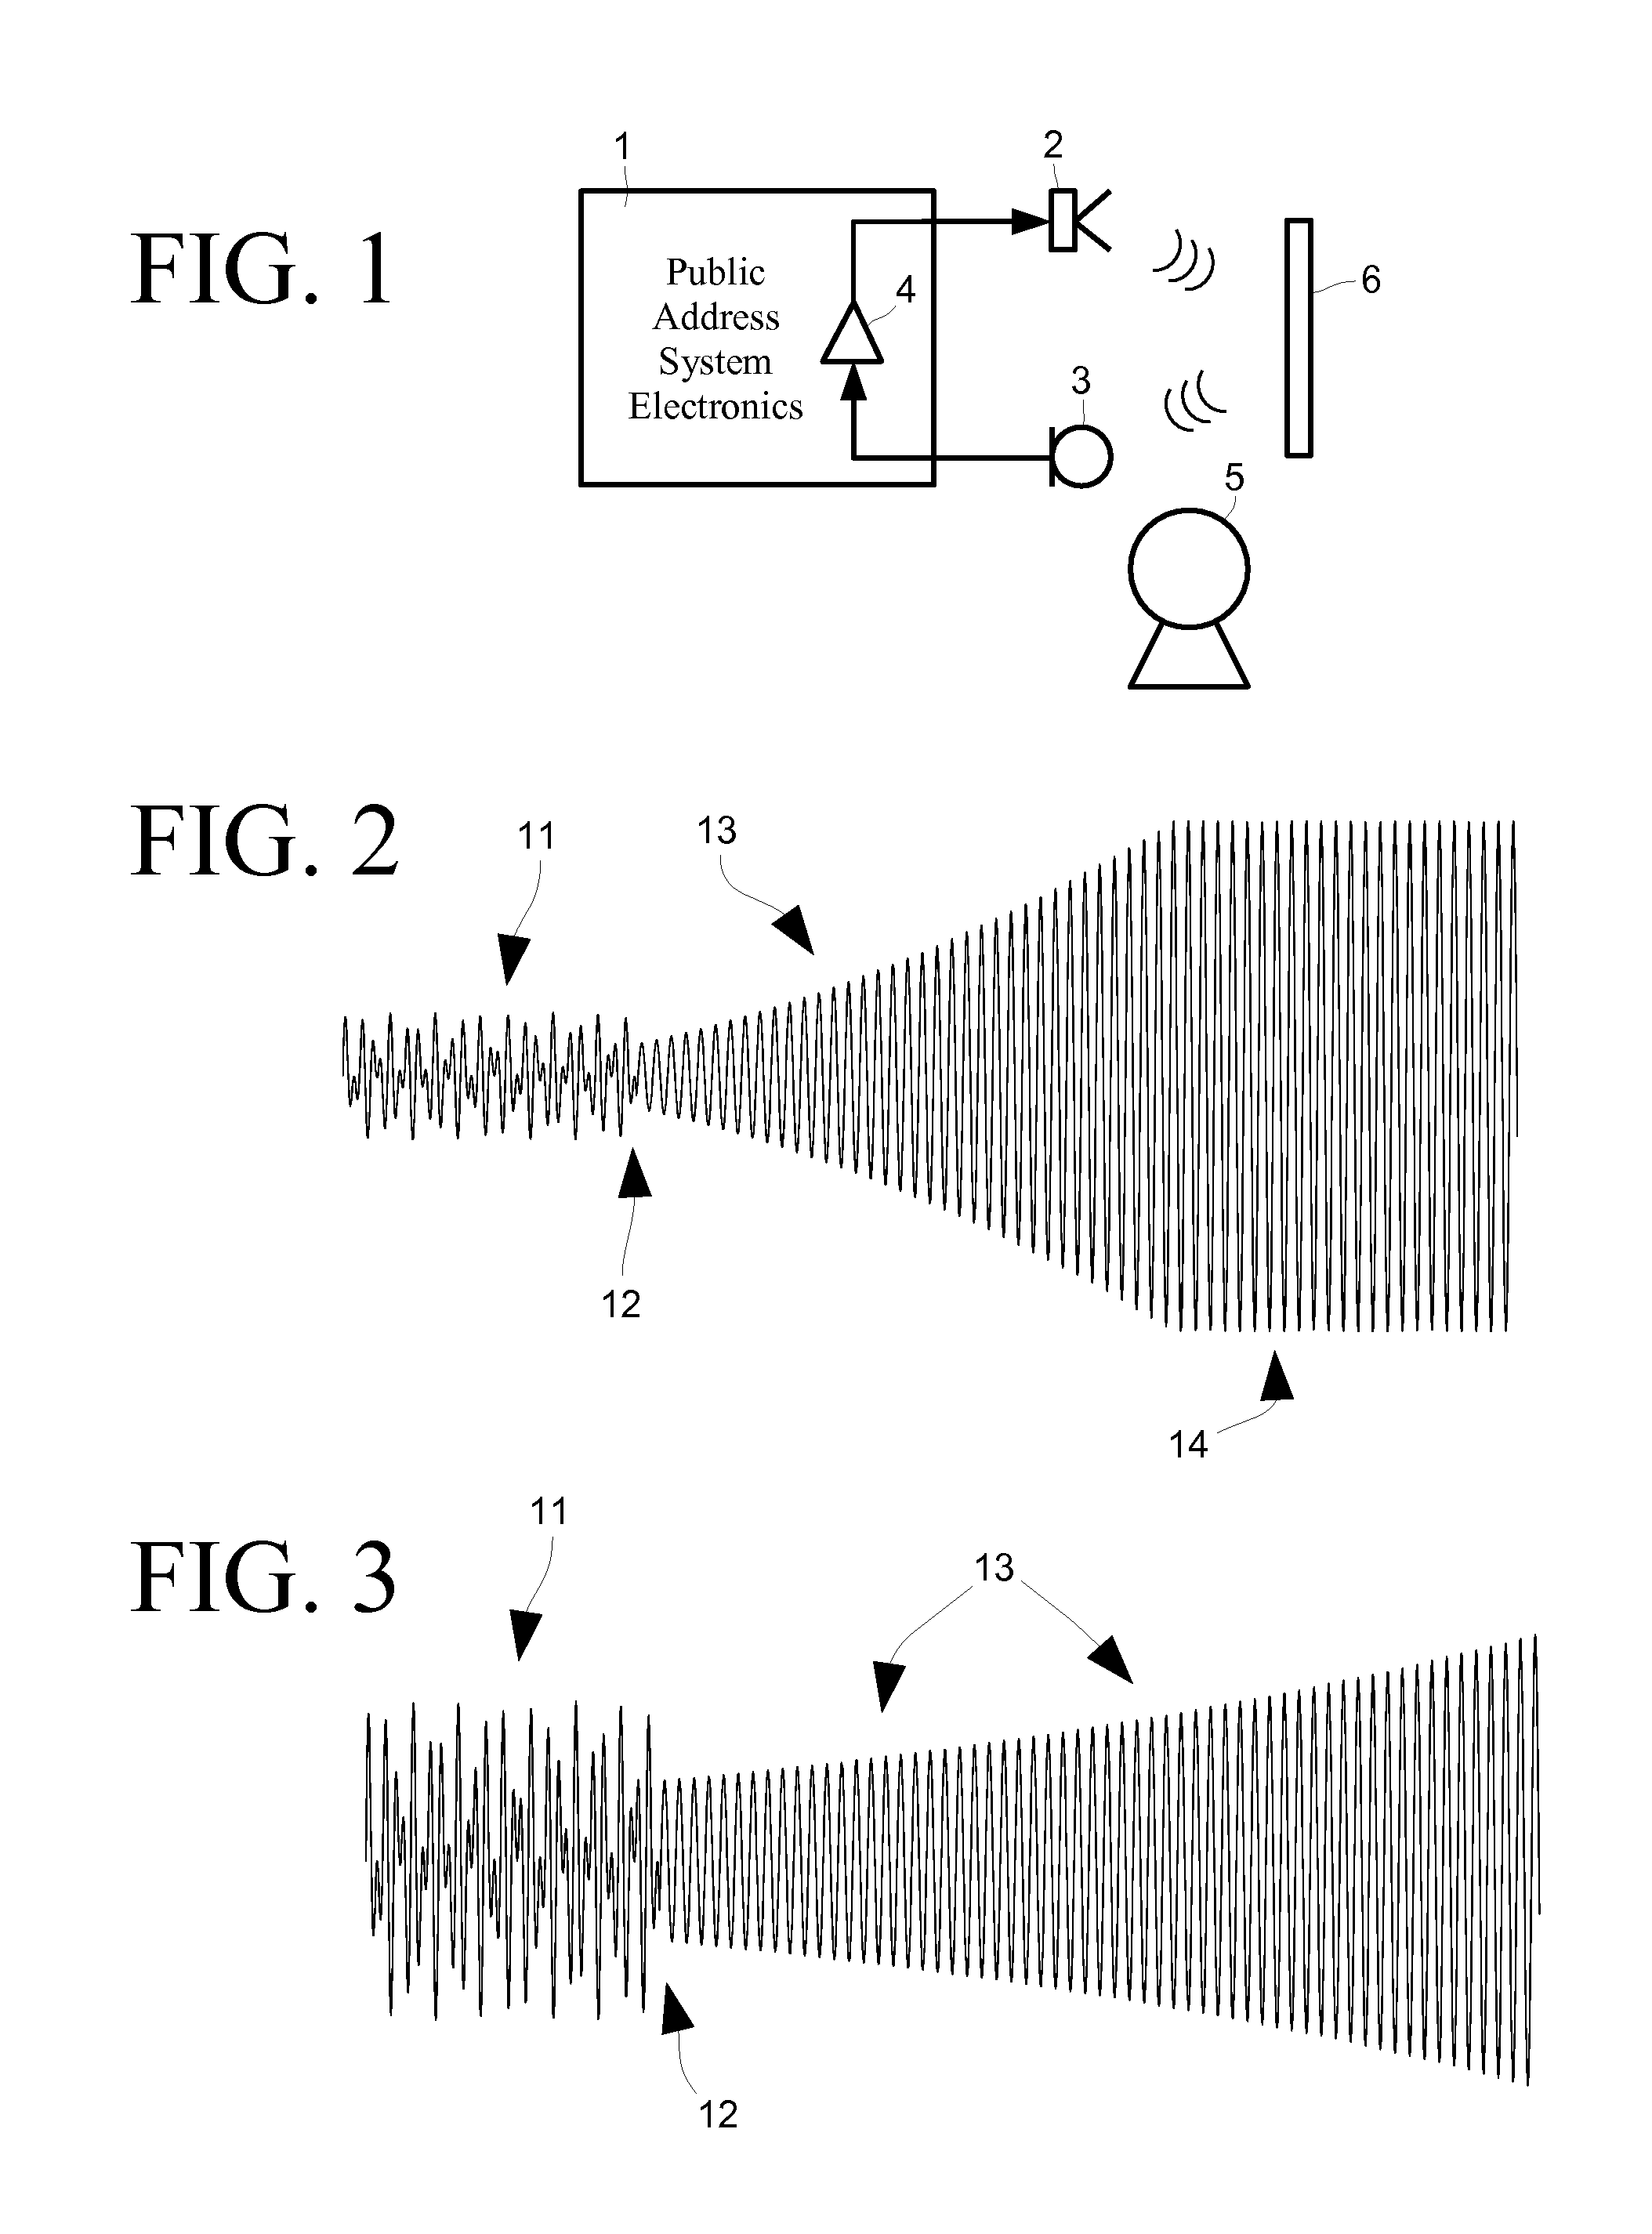 Probabilistic ringing feedback detector with frequency identification enhancement